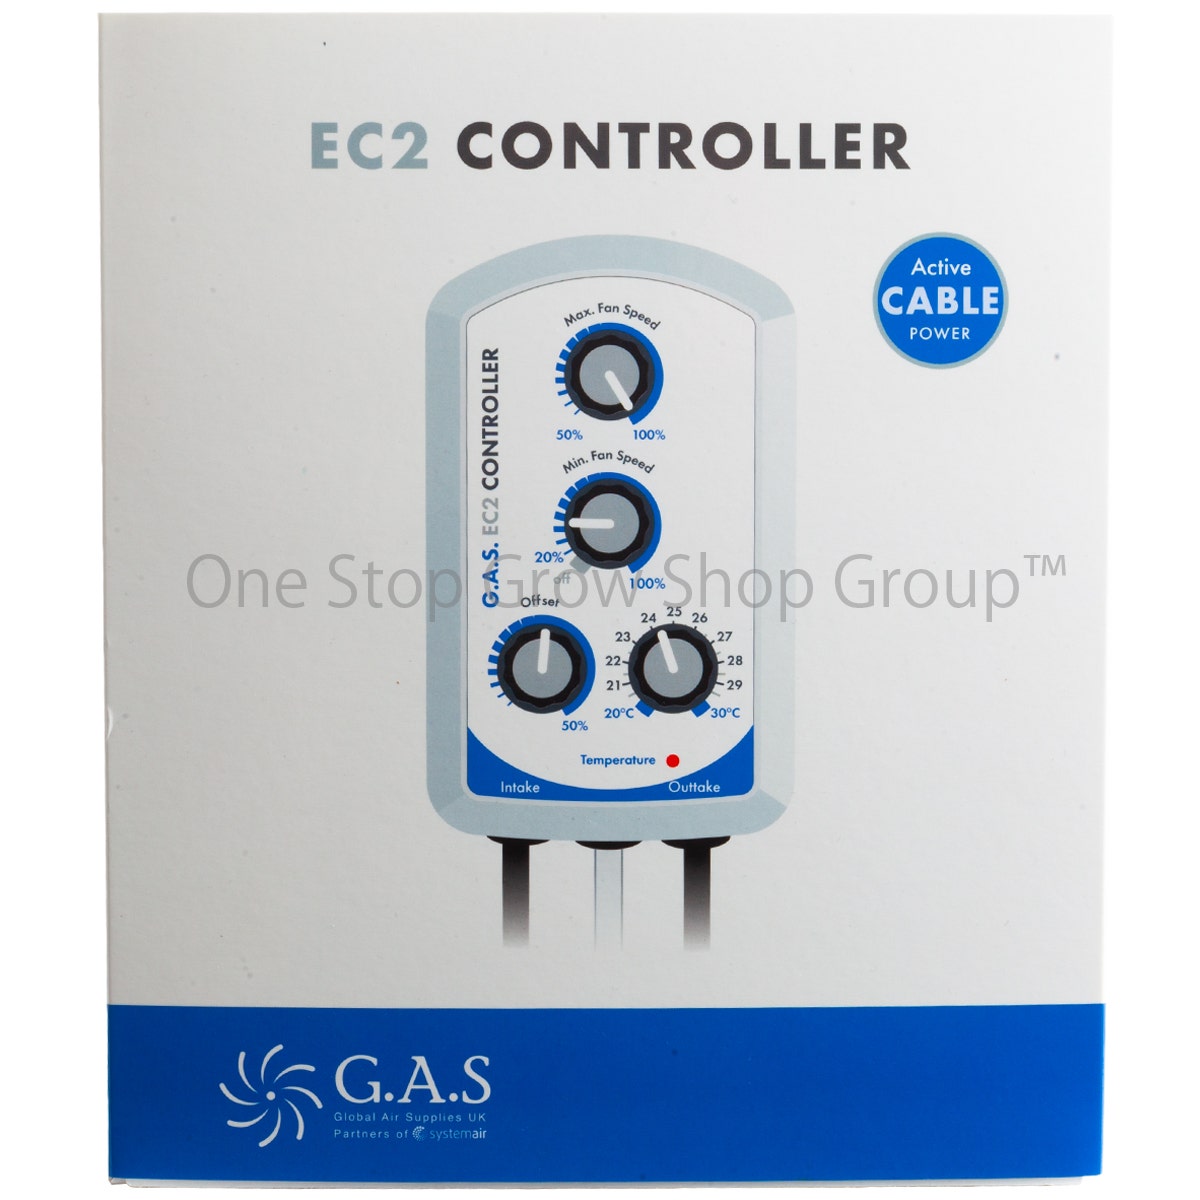 G.A.S - EC2 Thermostatic Fan Speed Controller with Balancer